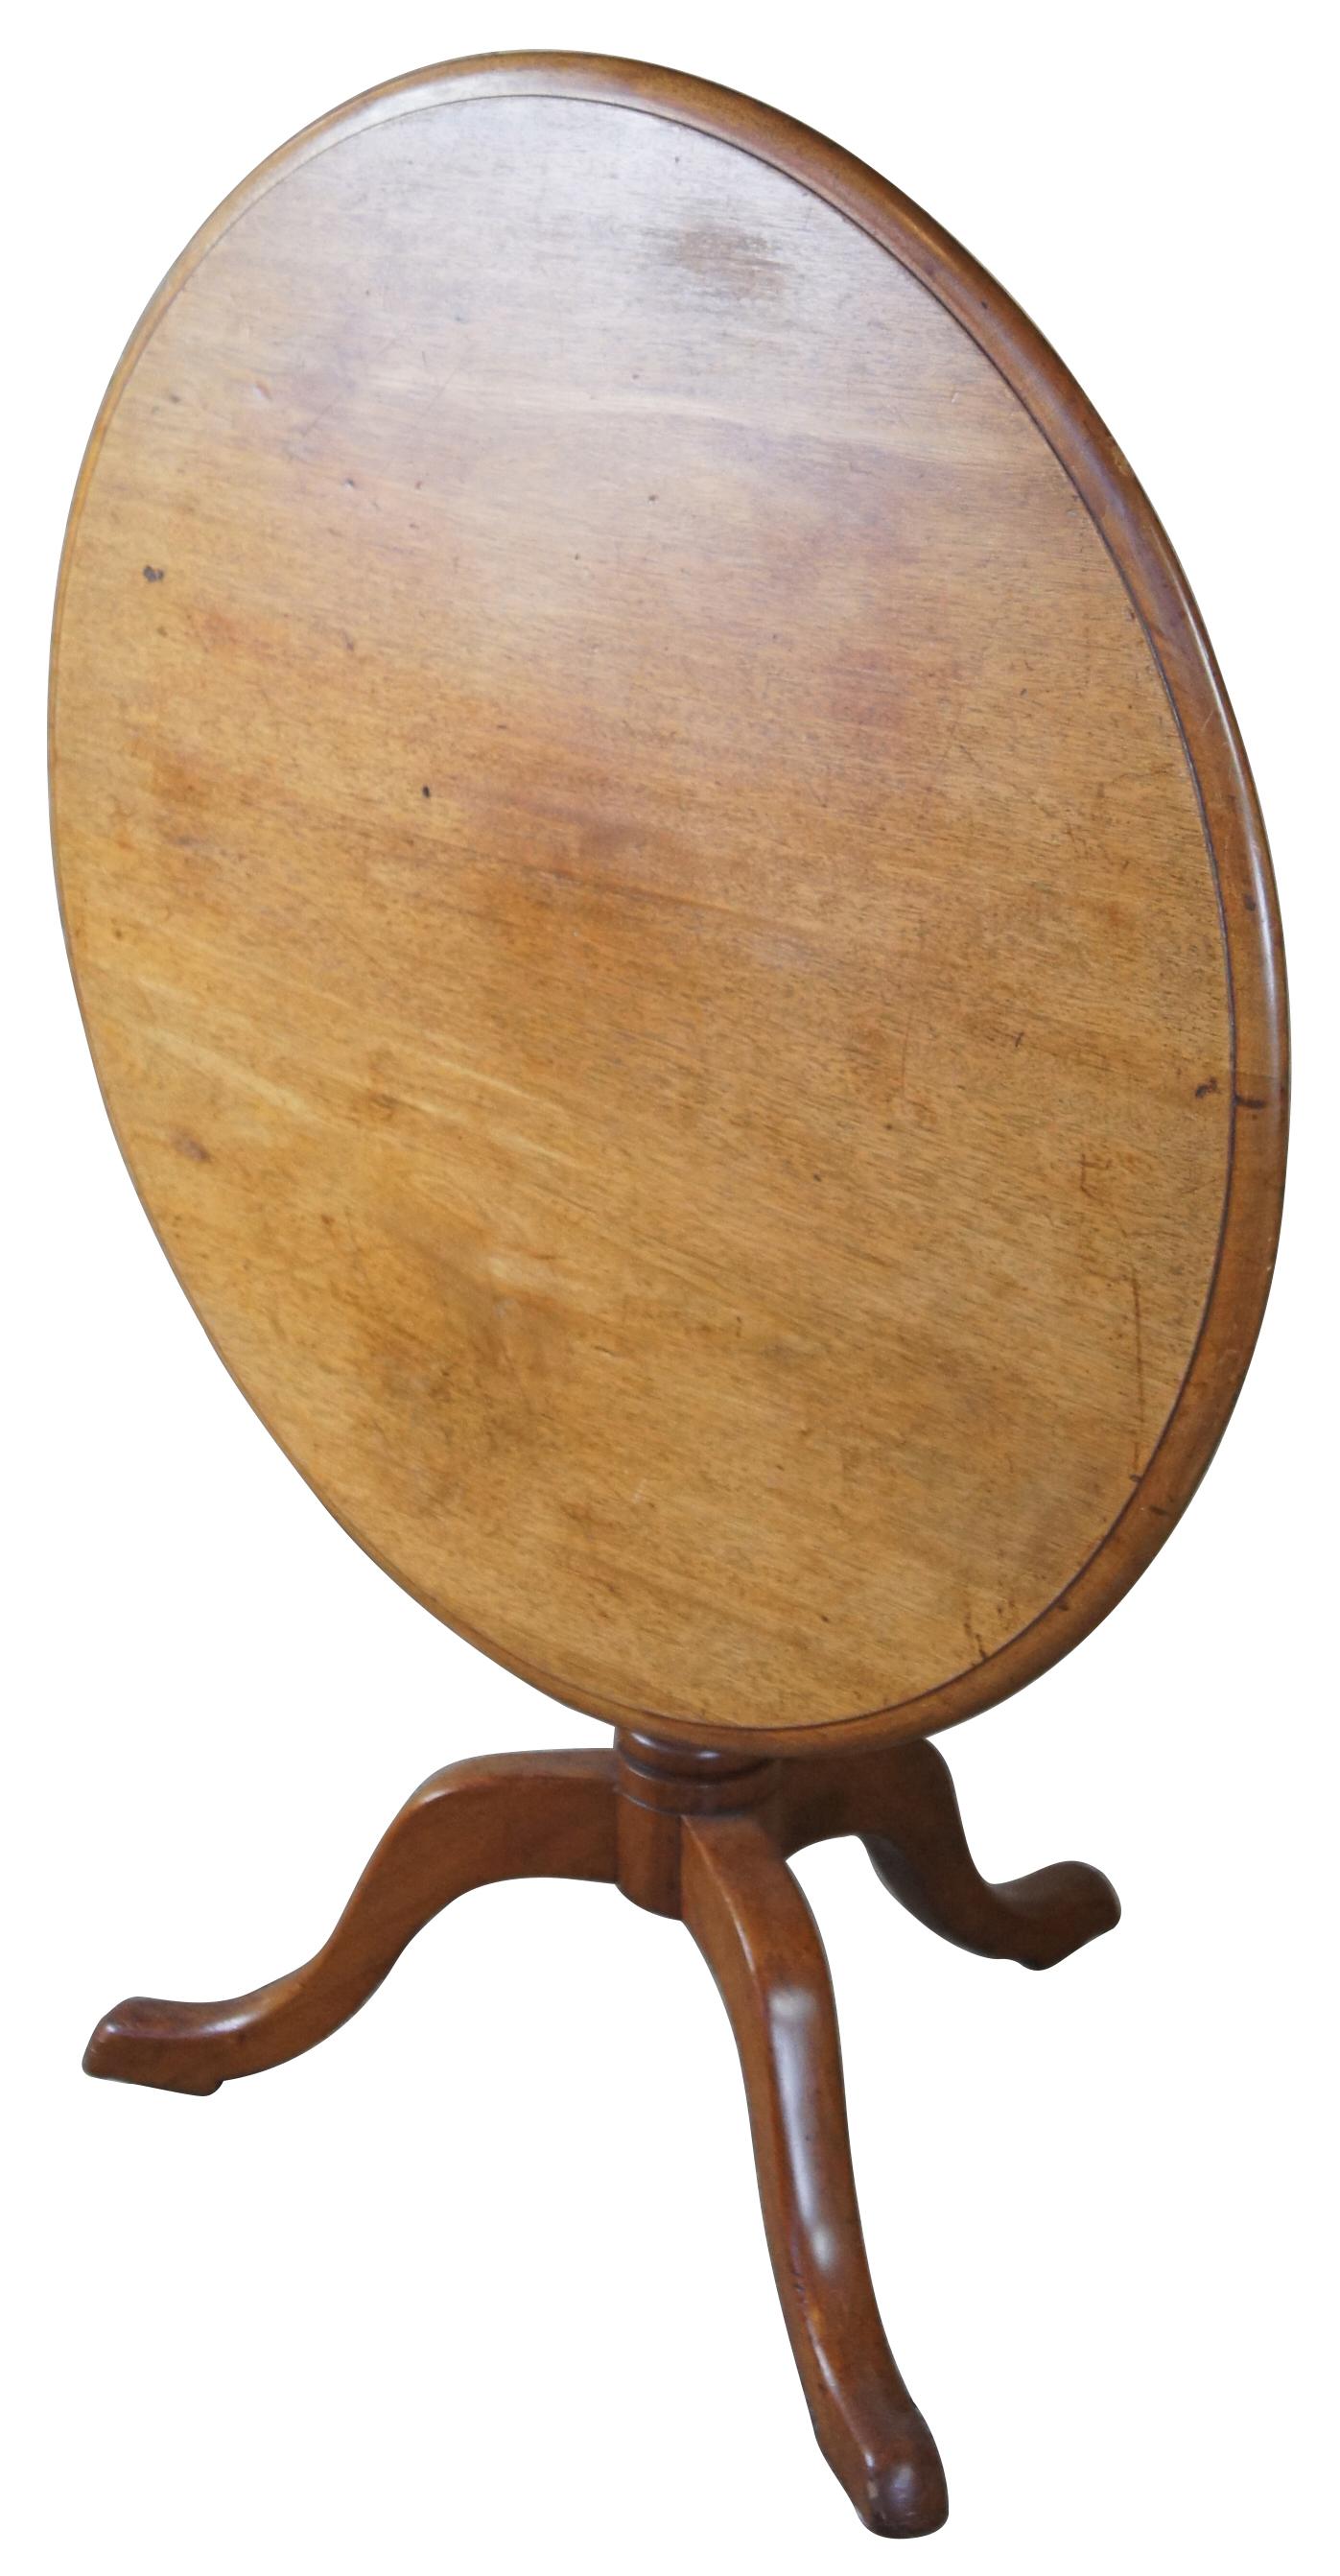 Early 20th century round tilt top table in the manner of Queen Anne or Georgian Styling. Made of mahogany, featuring a tri leg pedestal base and turned baluster support. Measures: 35”.
   